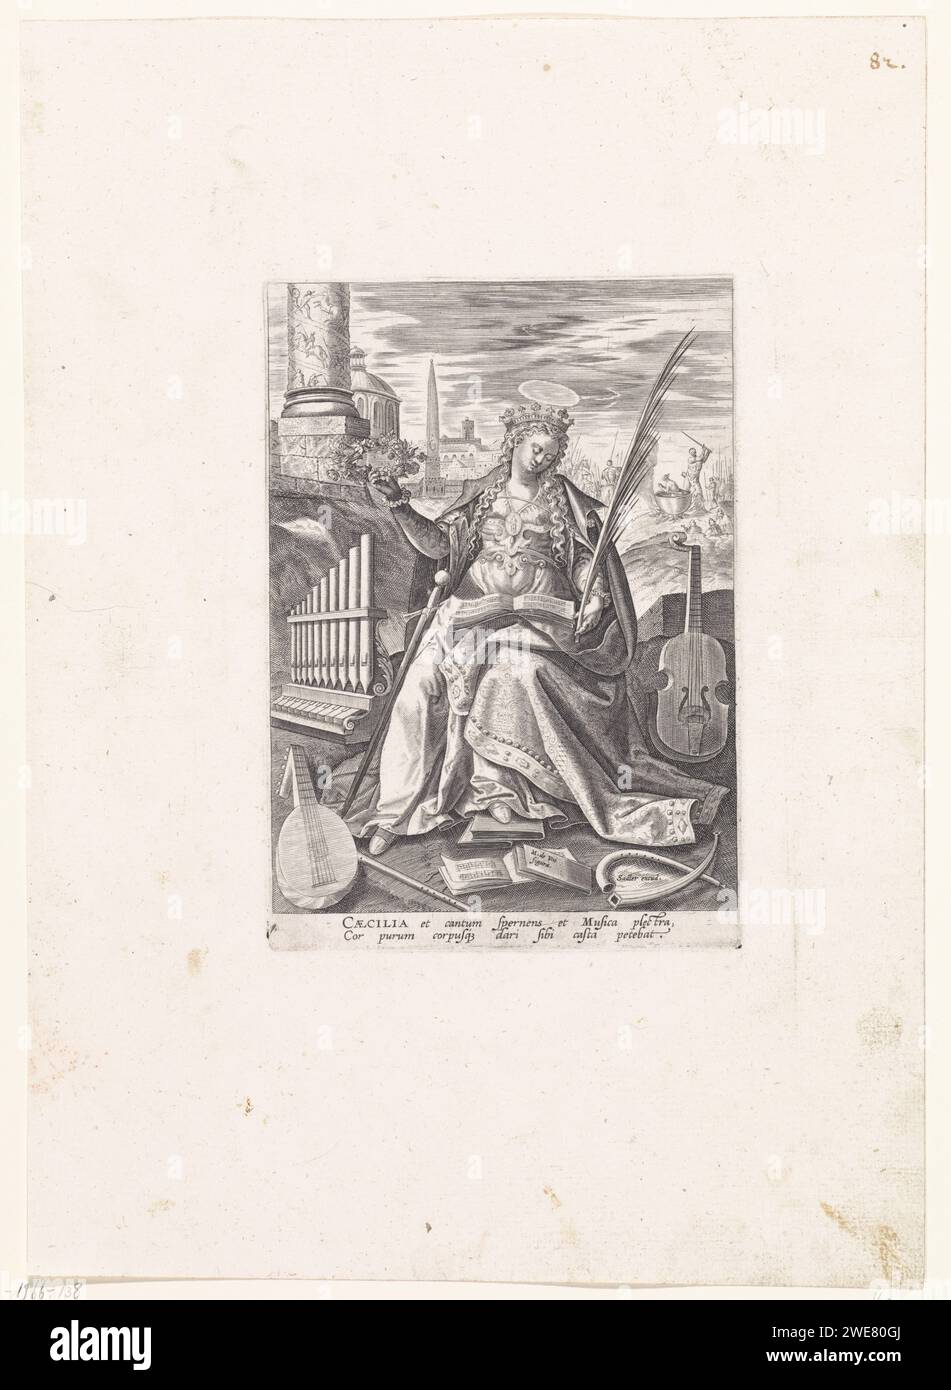 Saint Caecilia, Johann Sadeler (I), After Maerten de Vos, 1583 - 1587 print The crowned H. Caecilia, sitting with palm branch in hand, a music book on the lap. Several musical instruments around her: portative, lute, flute, Kromhoorn, Viola da Gamba and two music books. In the background on the right the beheading of the Heillige. The sixth print of a seventeen -part series with female saints. Germany paper engraving St. Cecilia as patroness of music. 'Castità ', 'Pudicitia', 'Vergogna honesta' (Ripa). organ. flute, aulos, tibia. lyre, cithara, psaltery. other wind instruments (with NAME). vio Stock Photo